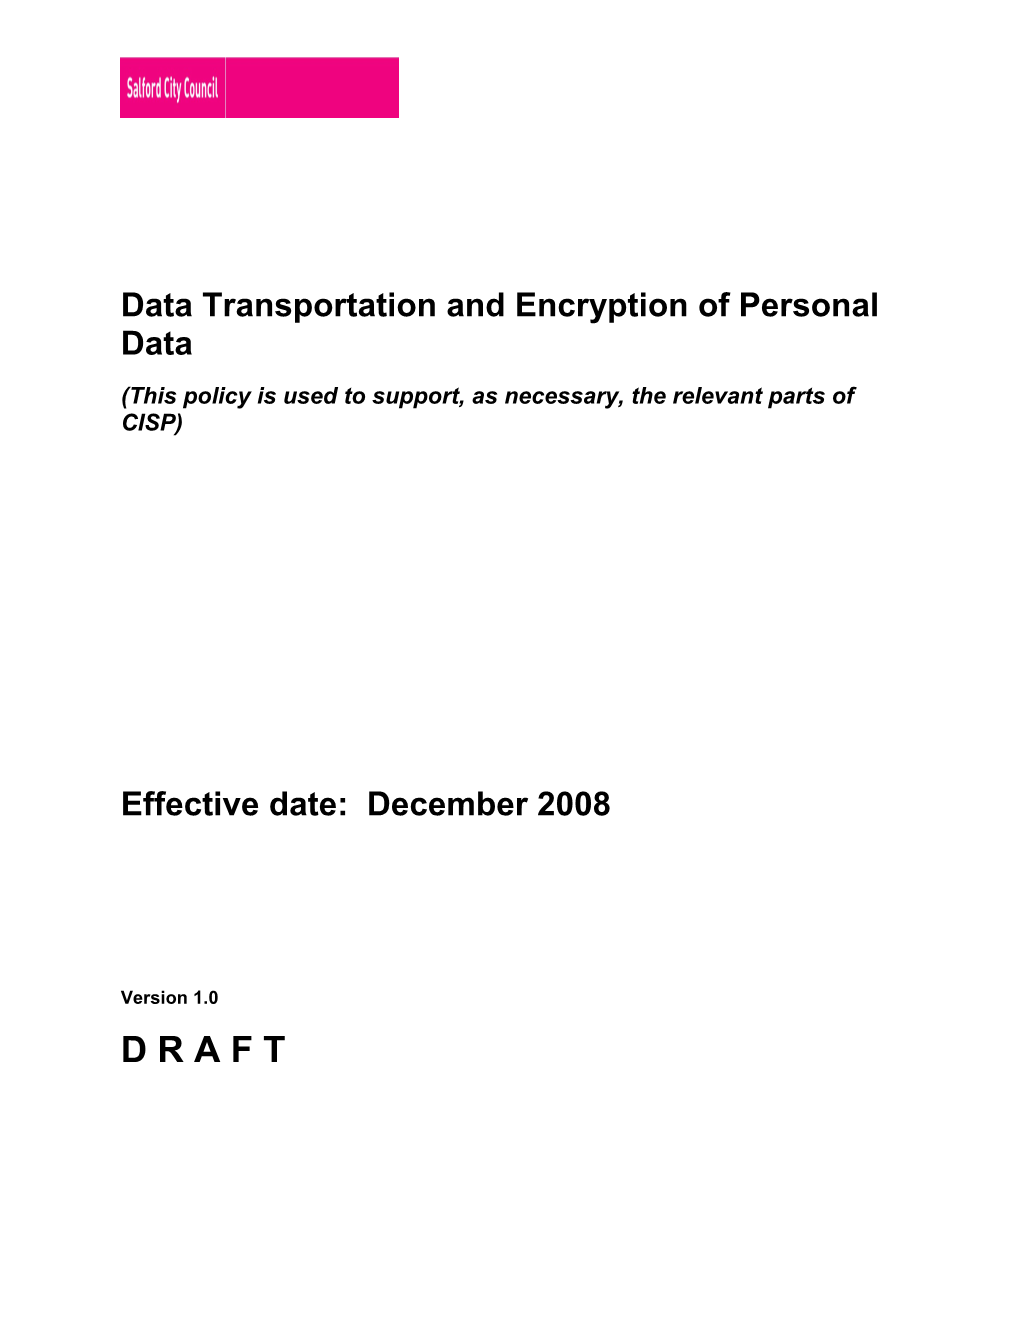 Data Loss and Encryption Policy